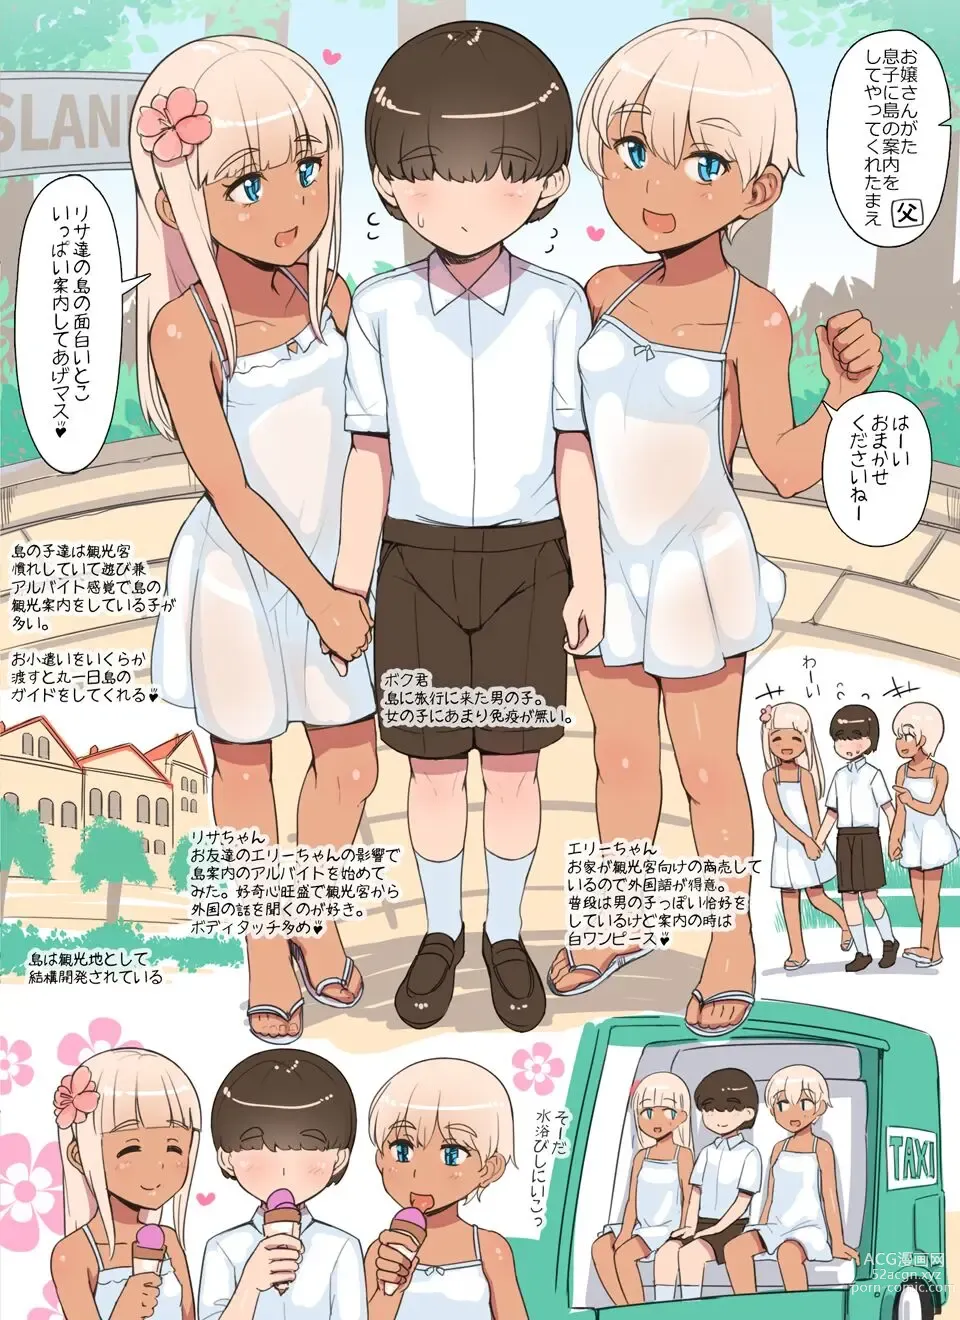 Page 1 of doujinshi Shota being shown around the island by brown Loli